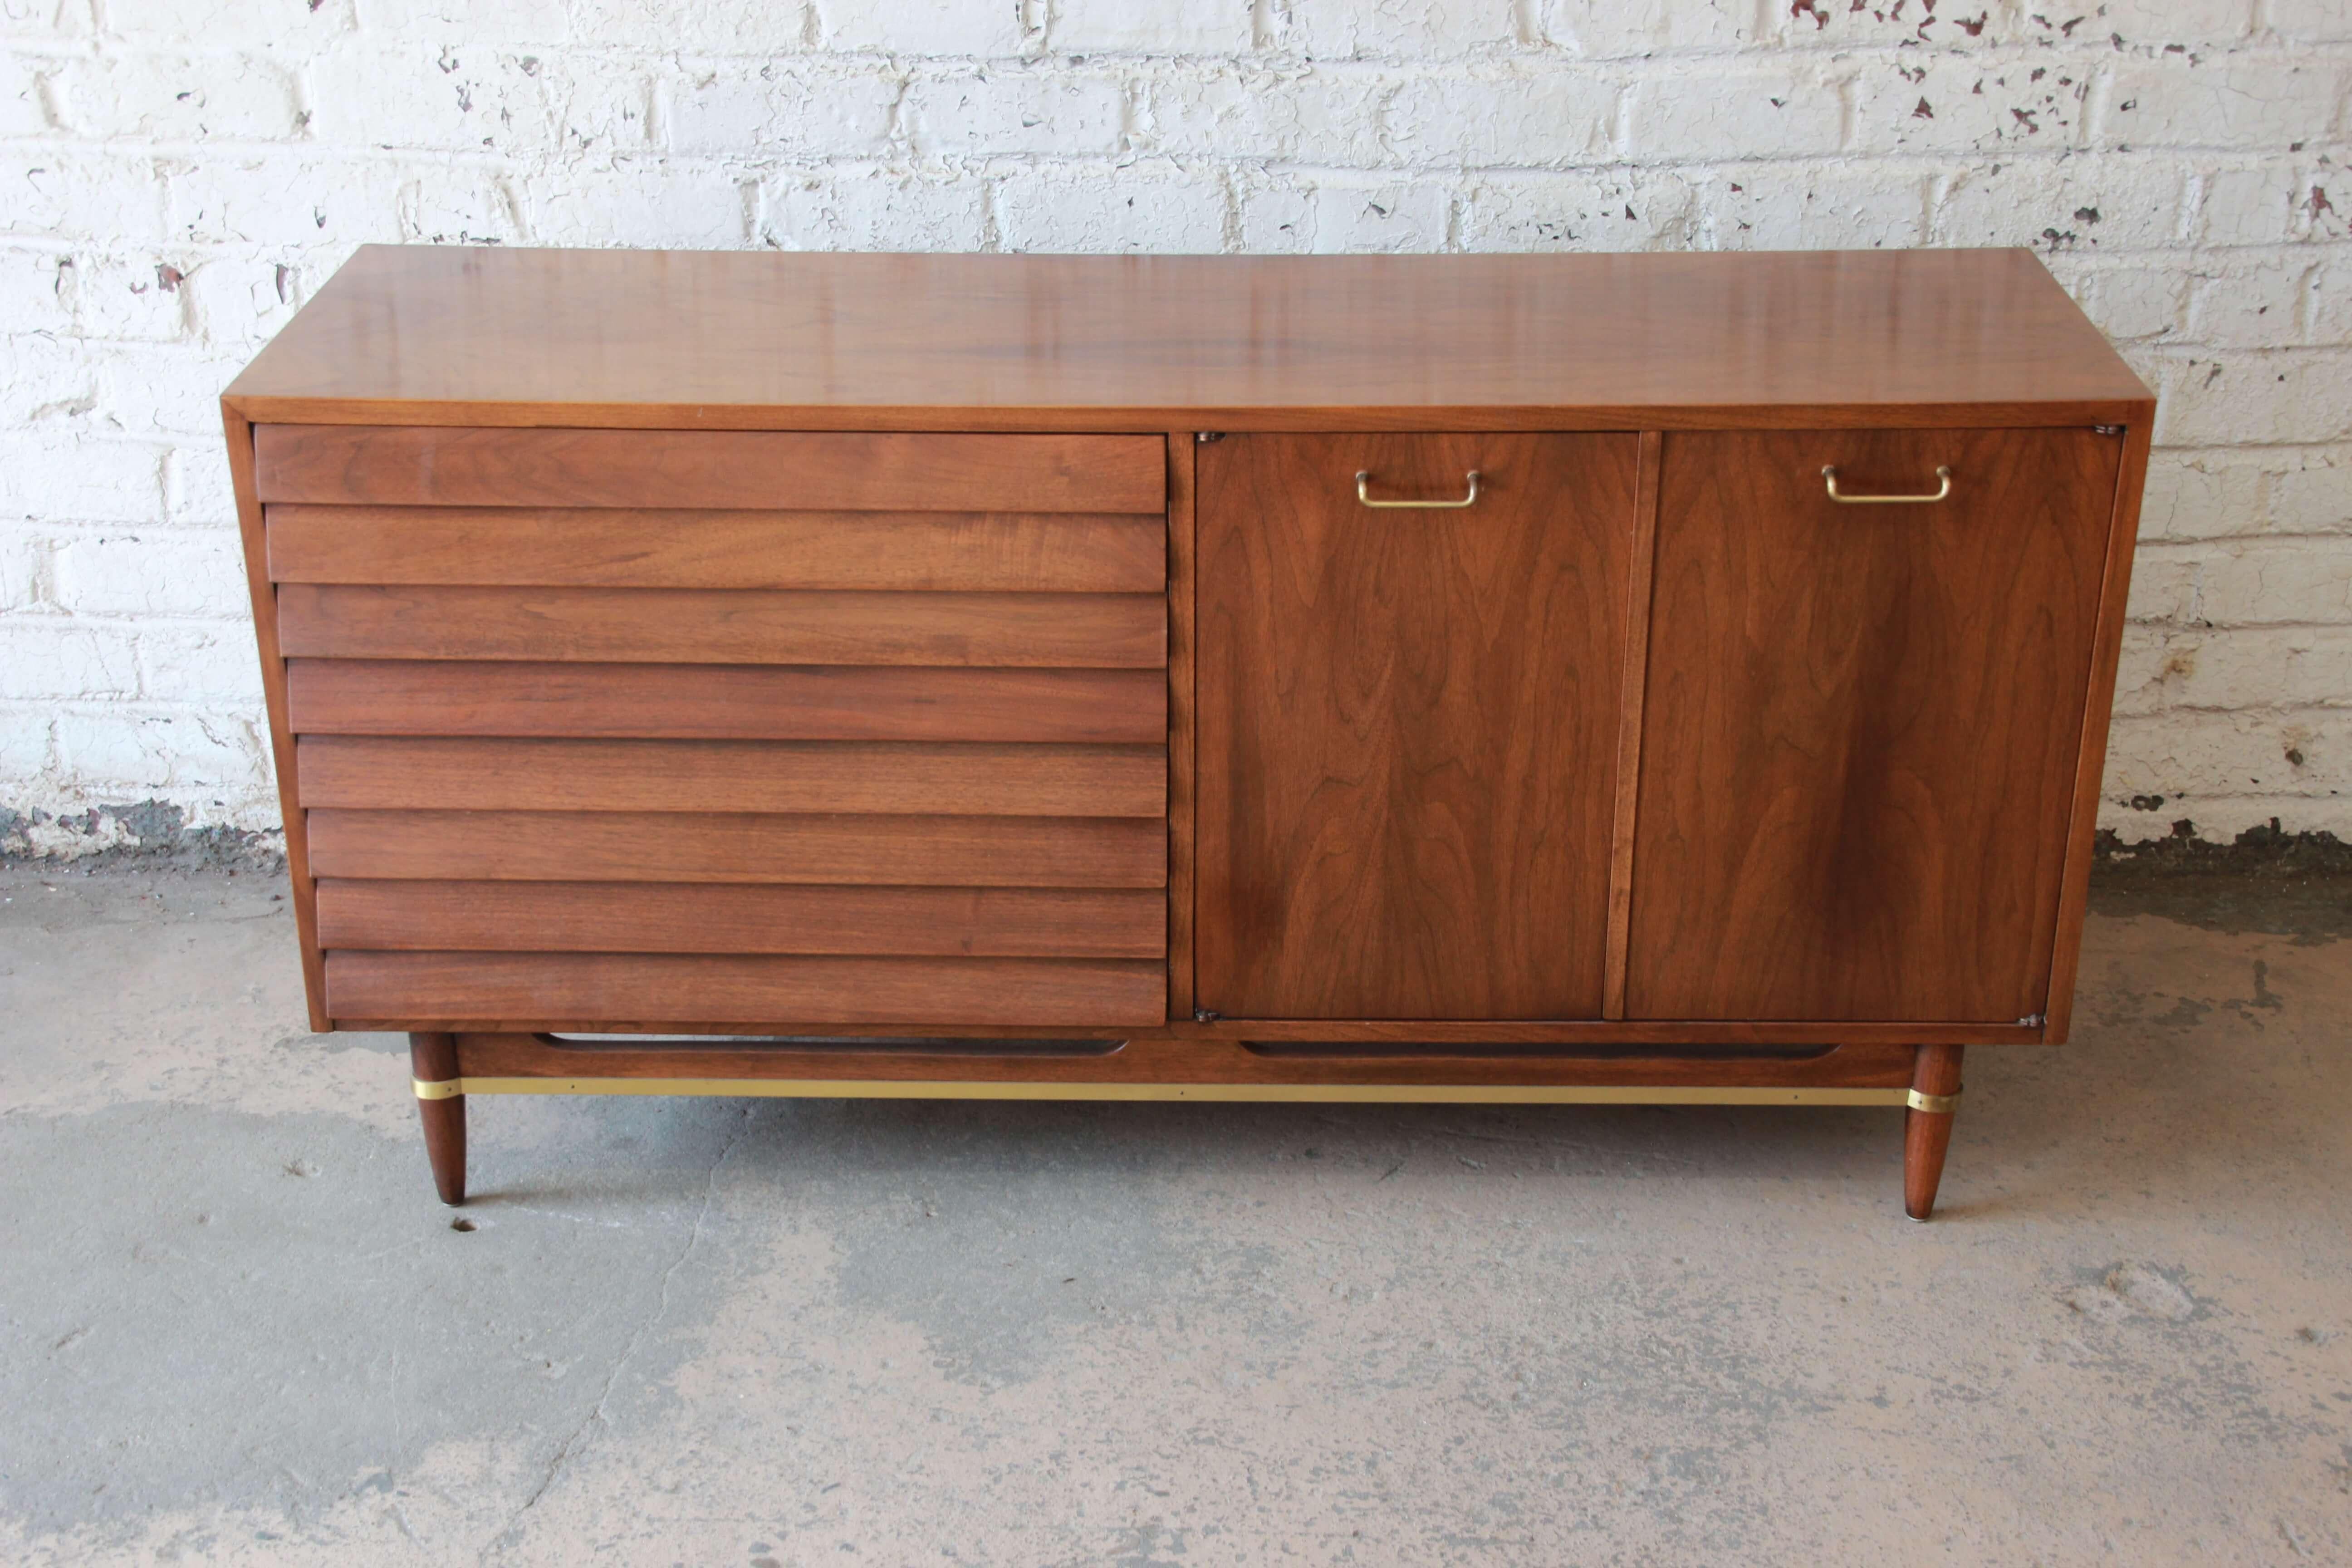 Offering an excellent original condition Merton Gershun for American of Martinsville dresser or credenza. This popular design has louvered drawers, brass pulls, and brass trim. The right cabinet doors open to reveal three drawers and a cabinet area.